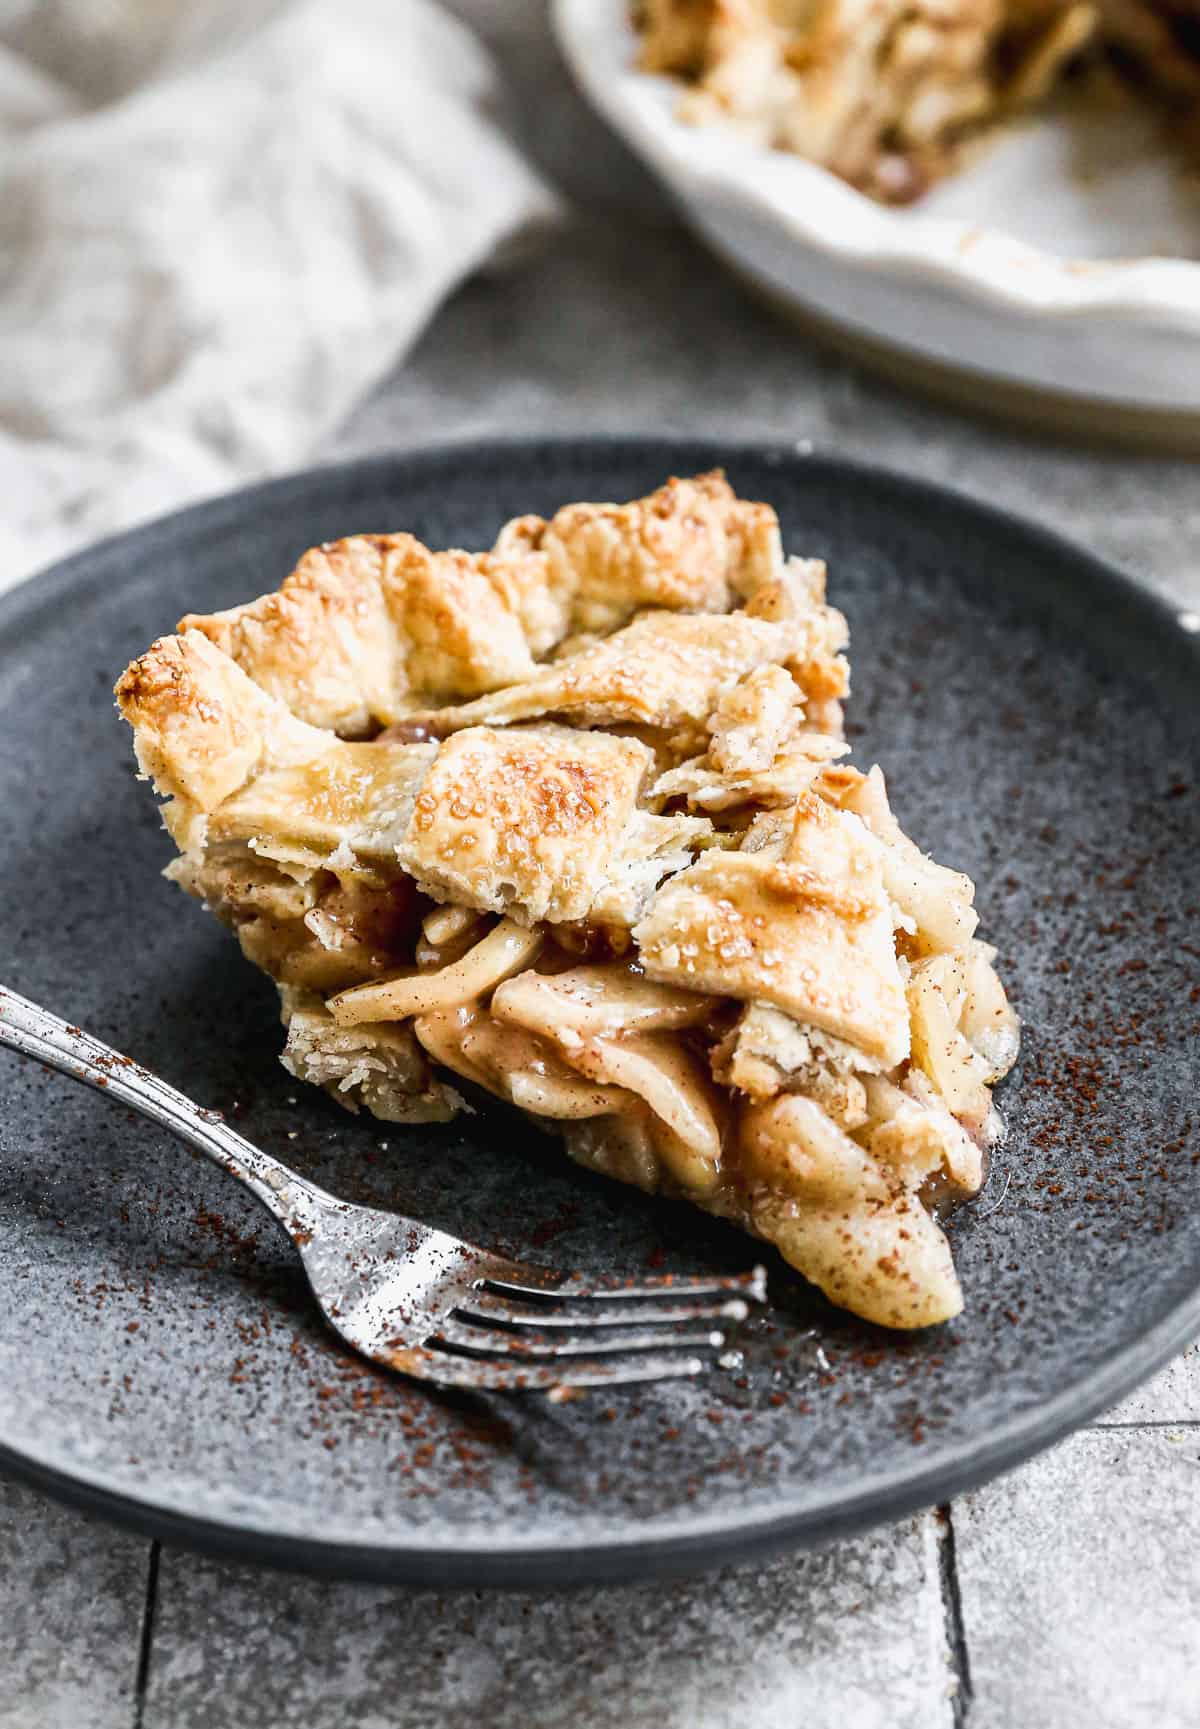 A slice of easy Apple Pie on a plate, ready to enjoy!